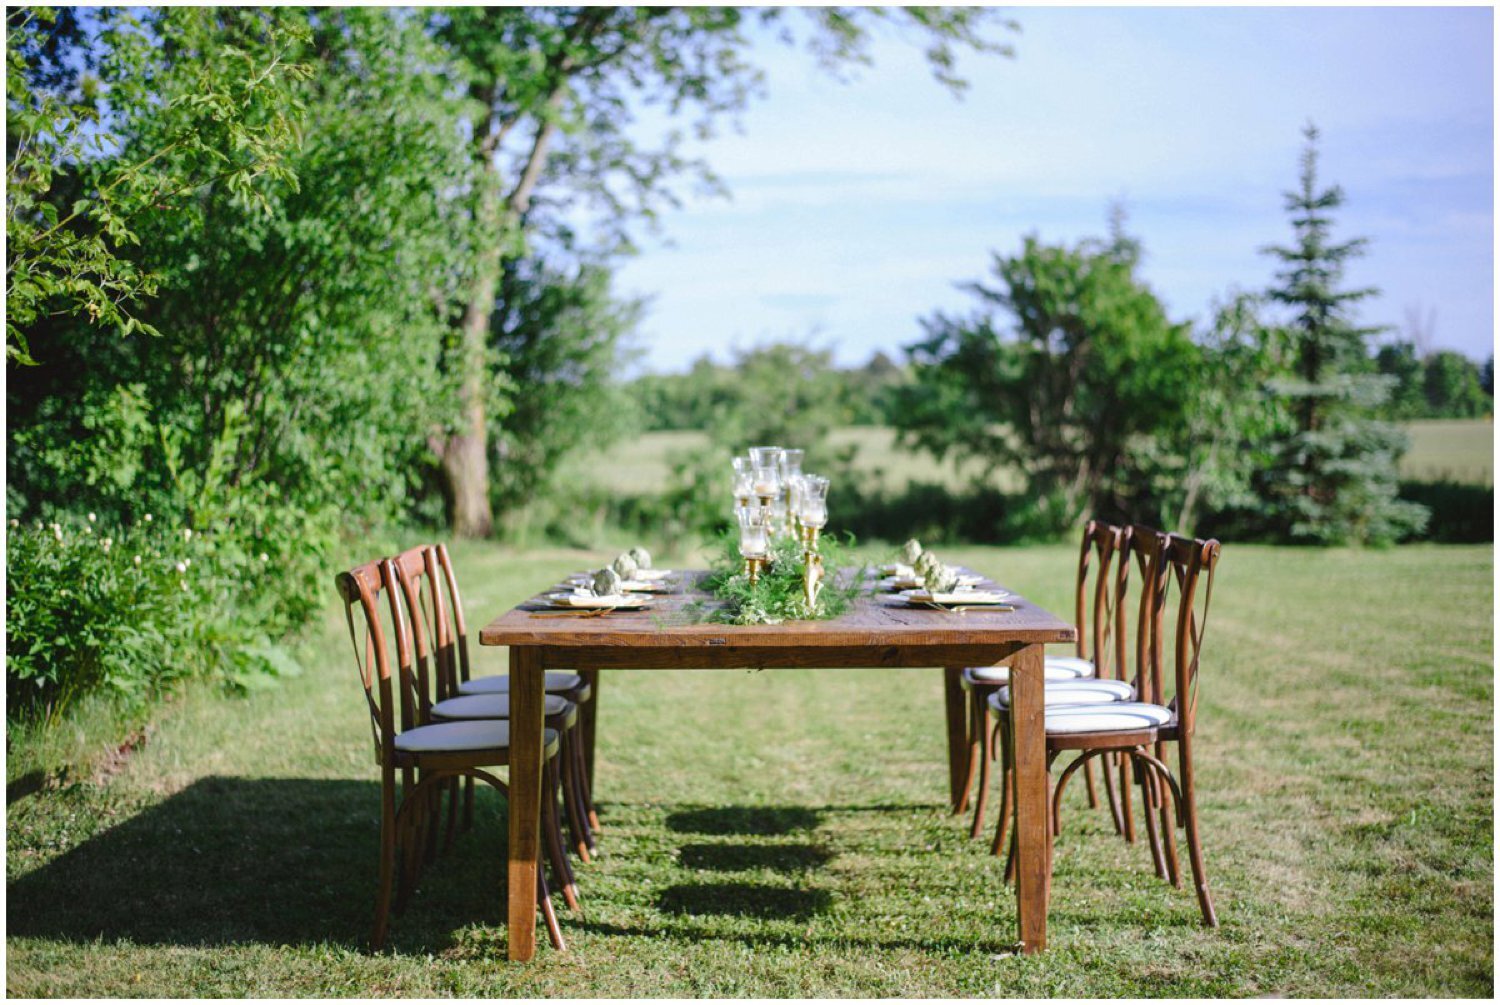 Harvest table in a field Toronto wedding photographer 